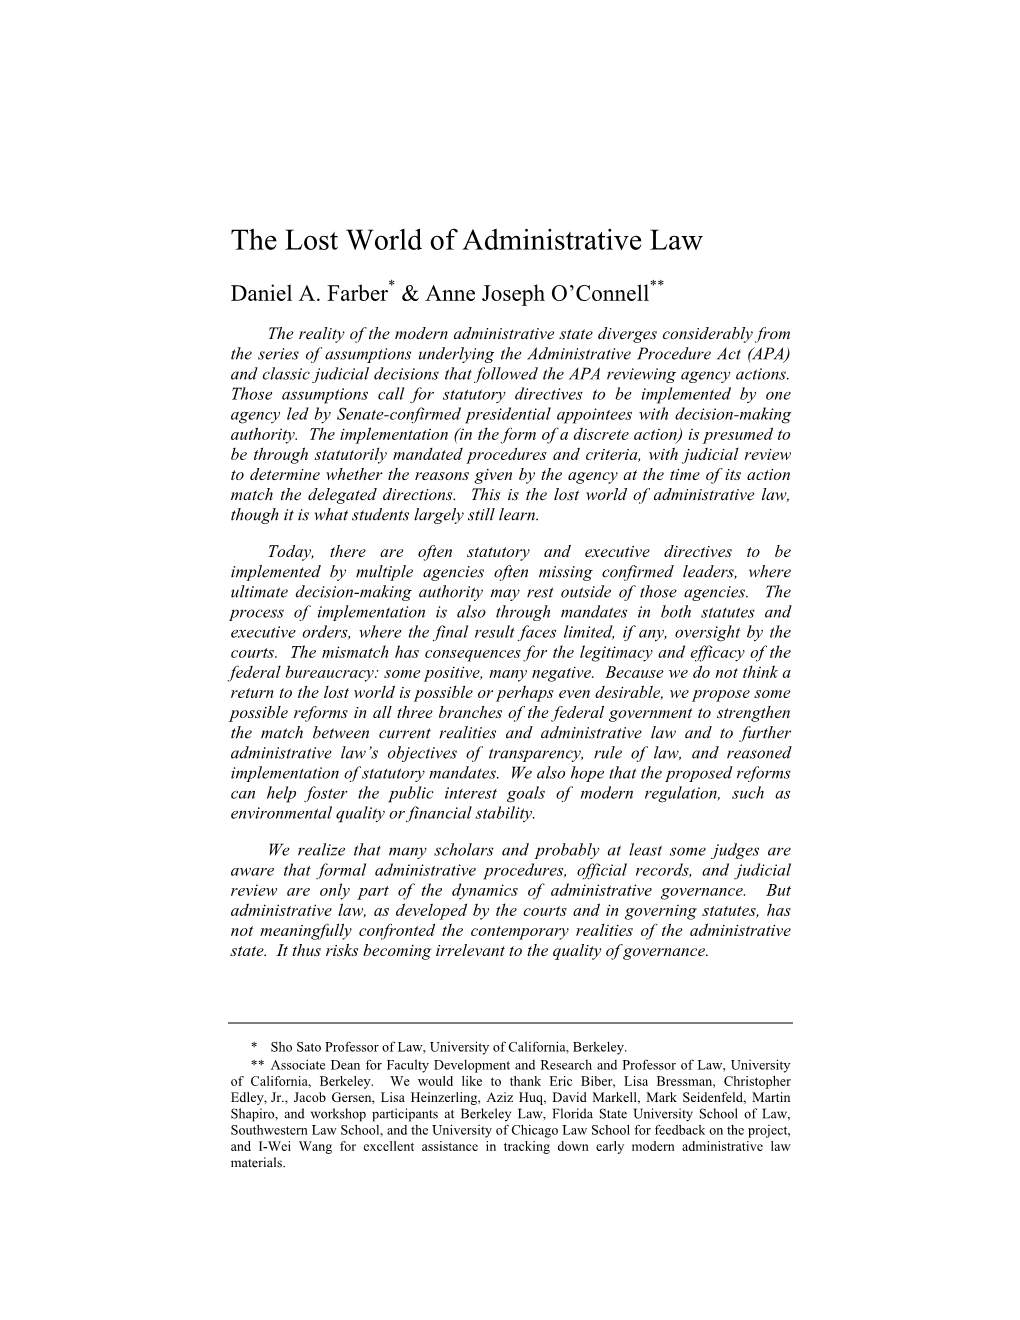 The Lost World of Administrative Law